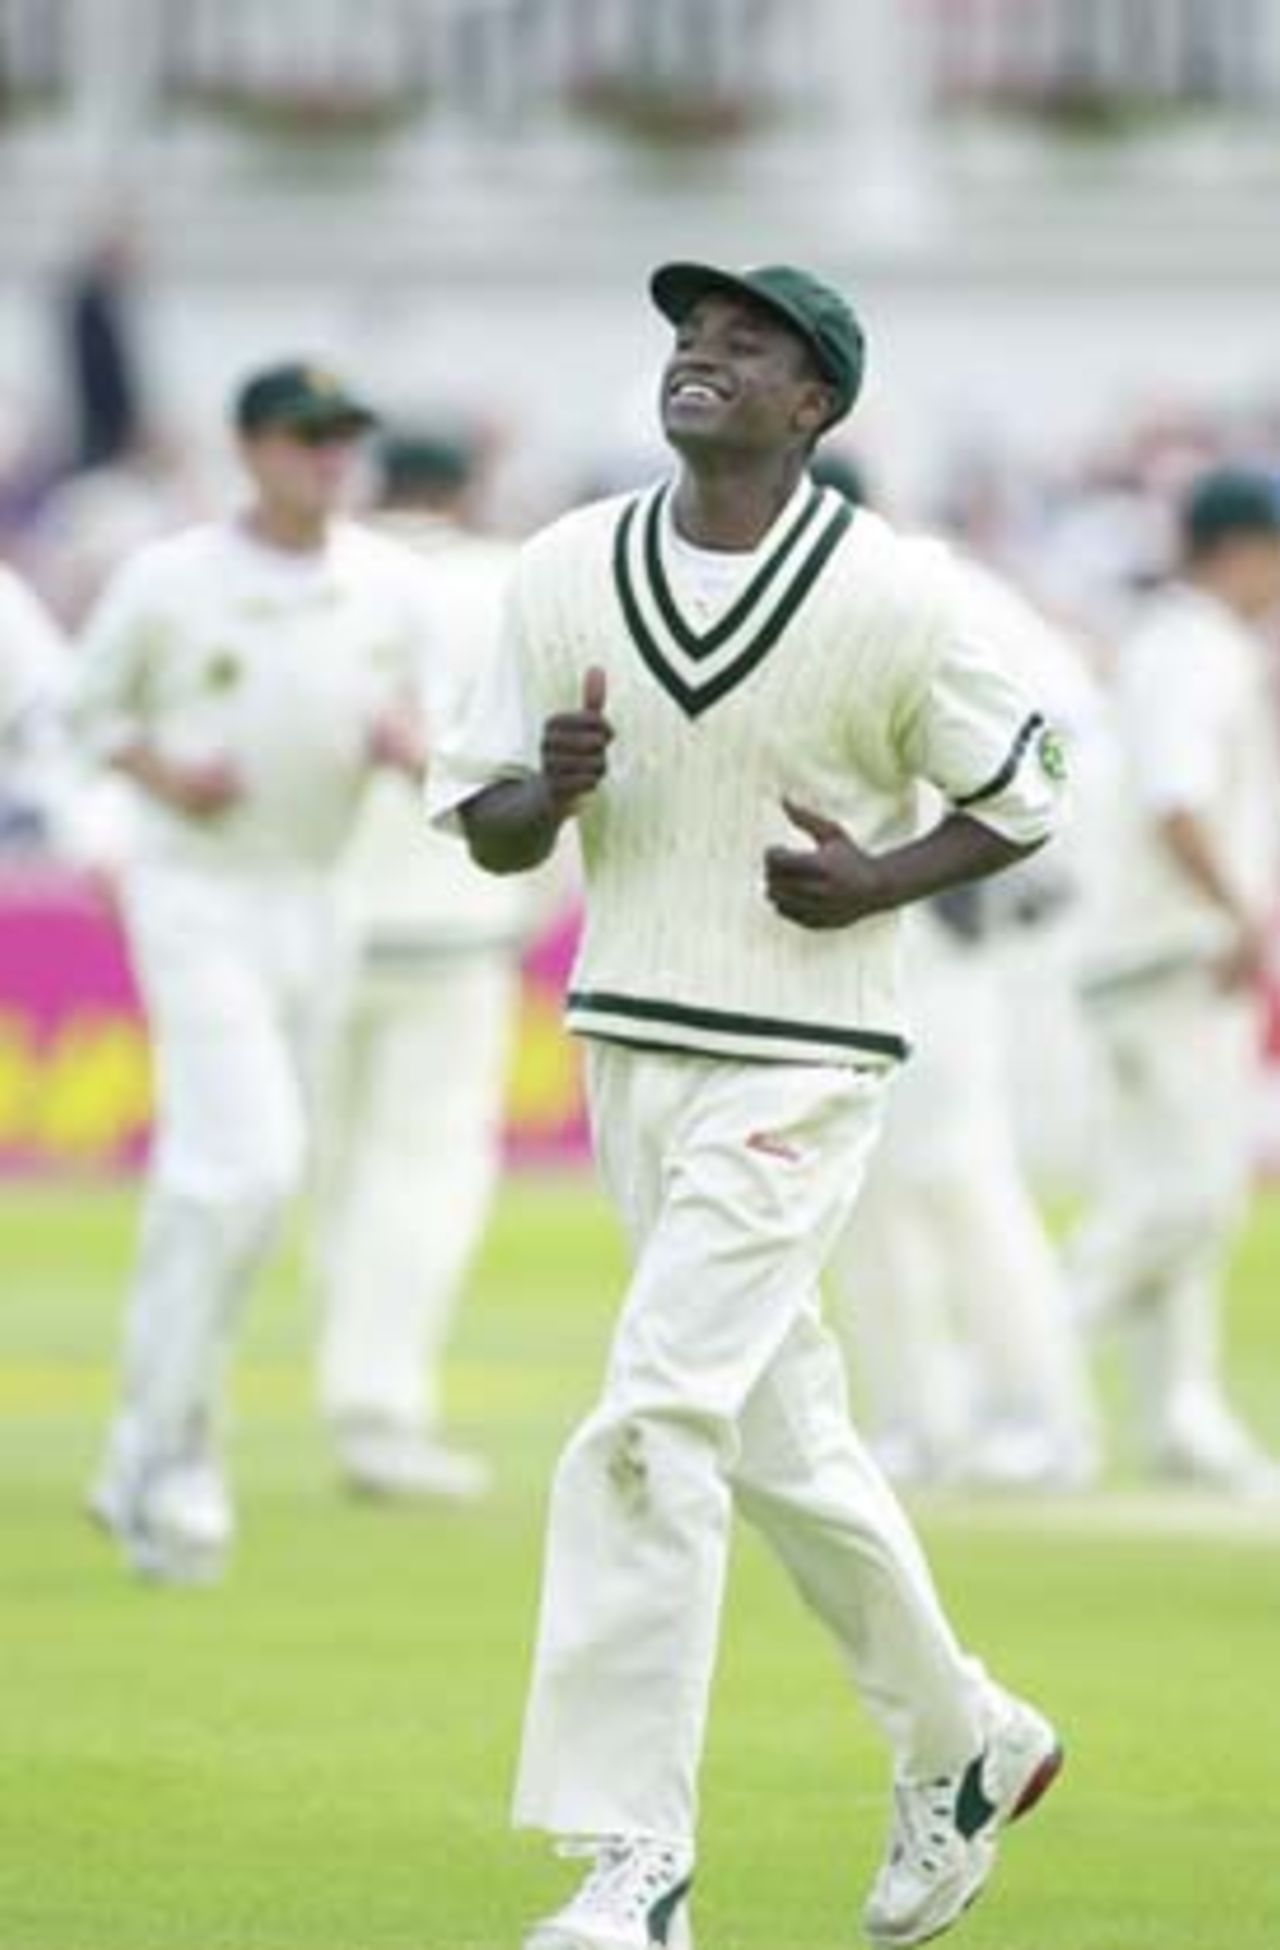 On his test debut for Zimbabwe